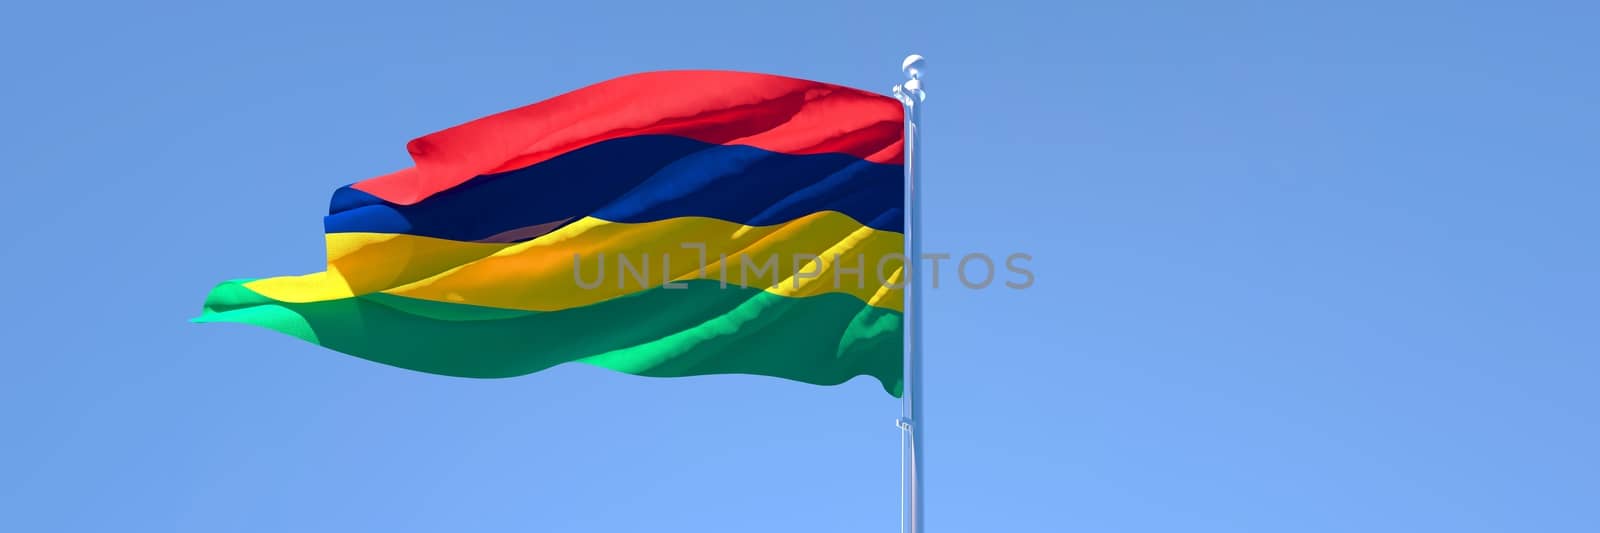 3D rendering of the national flag of Mauritius waving in the wind against a blue sky